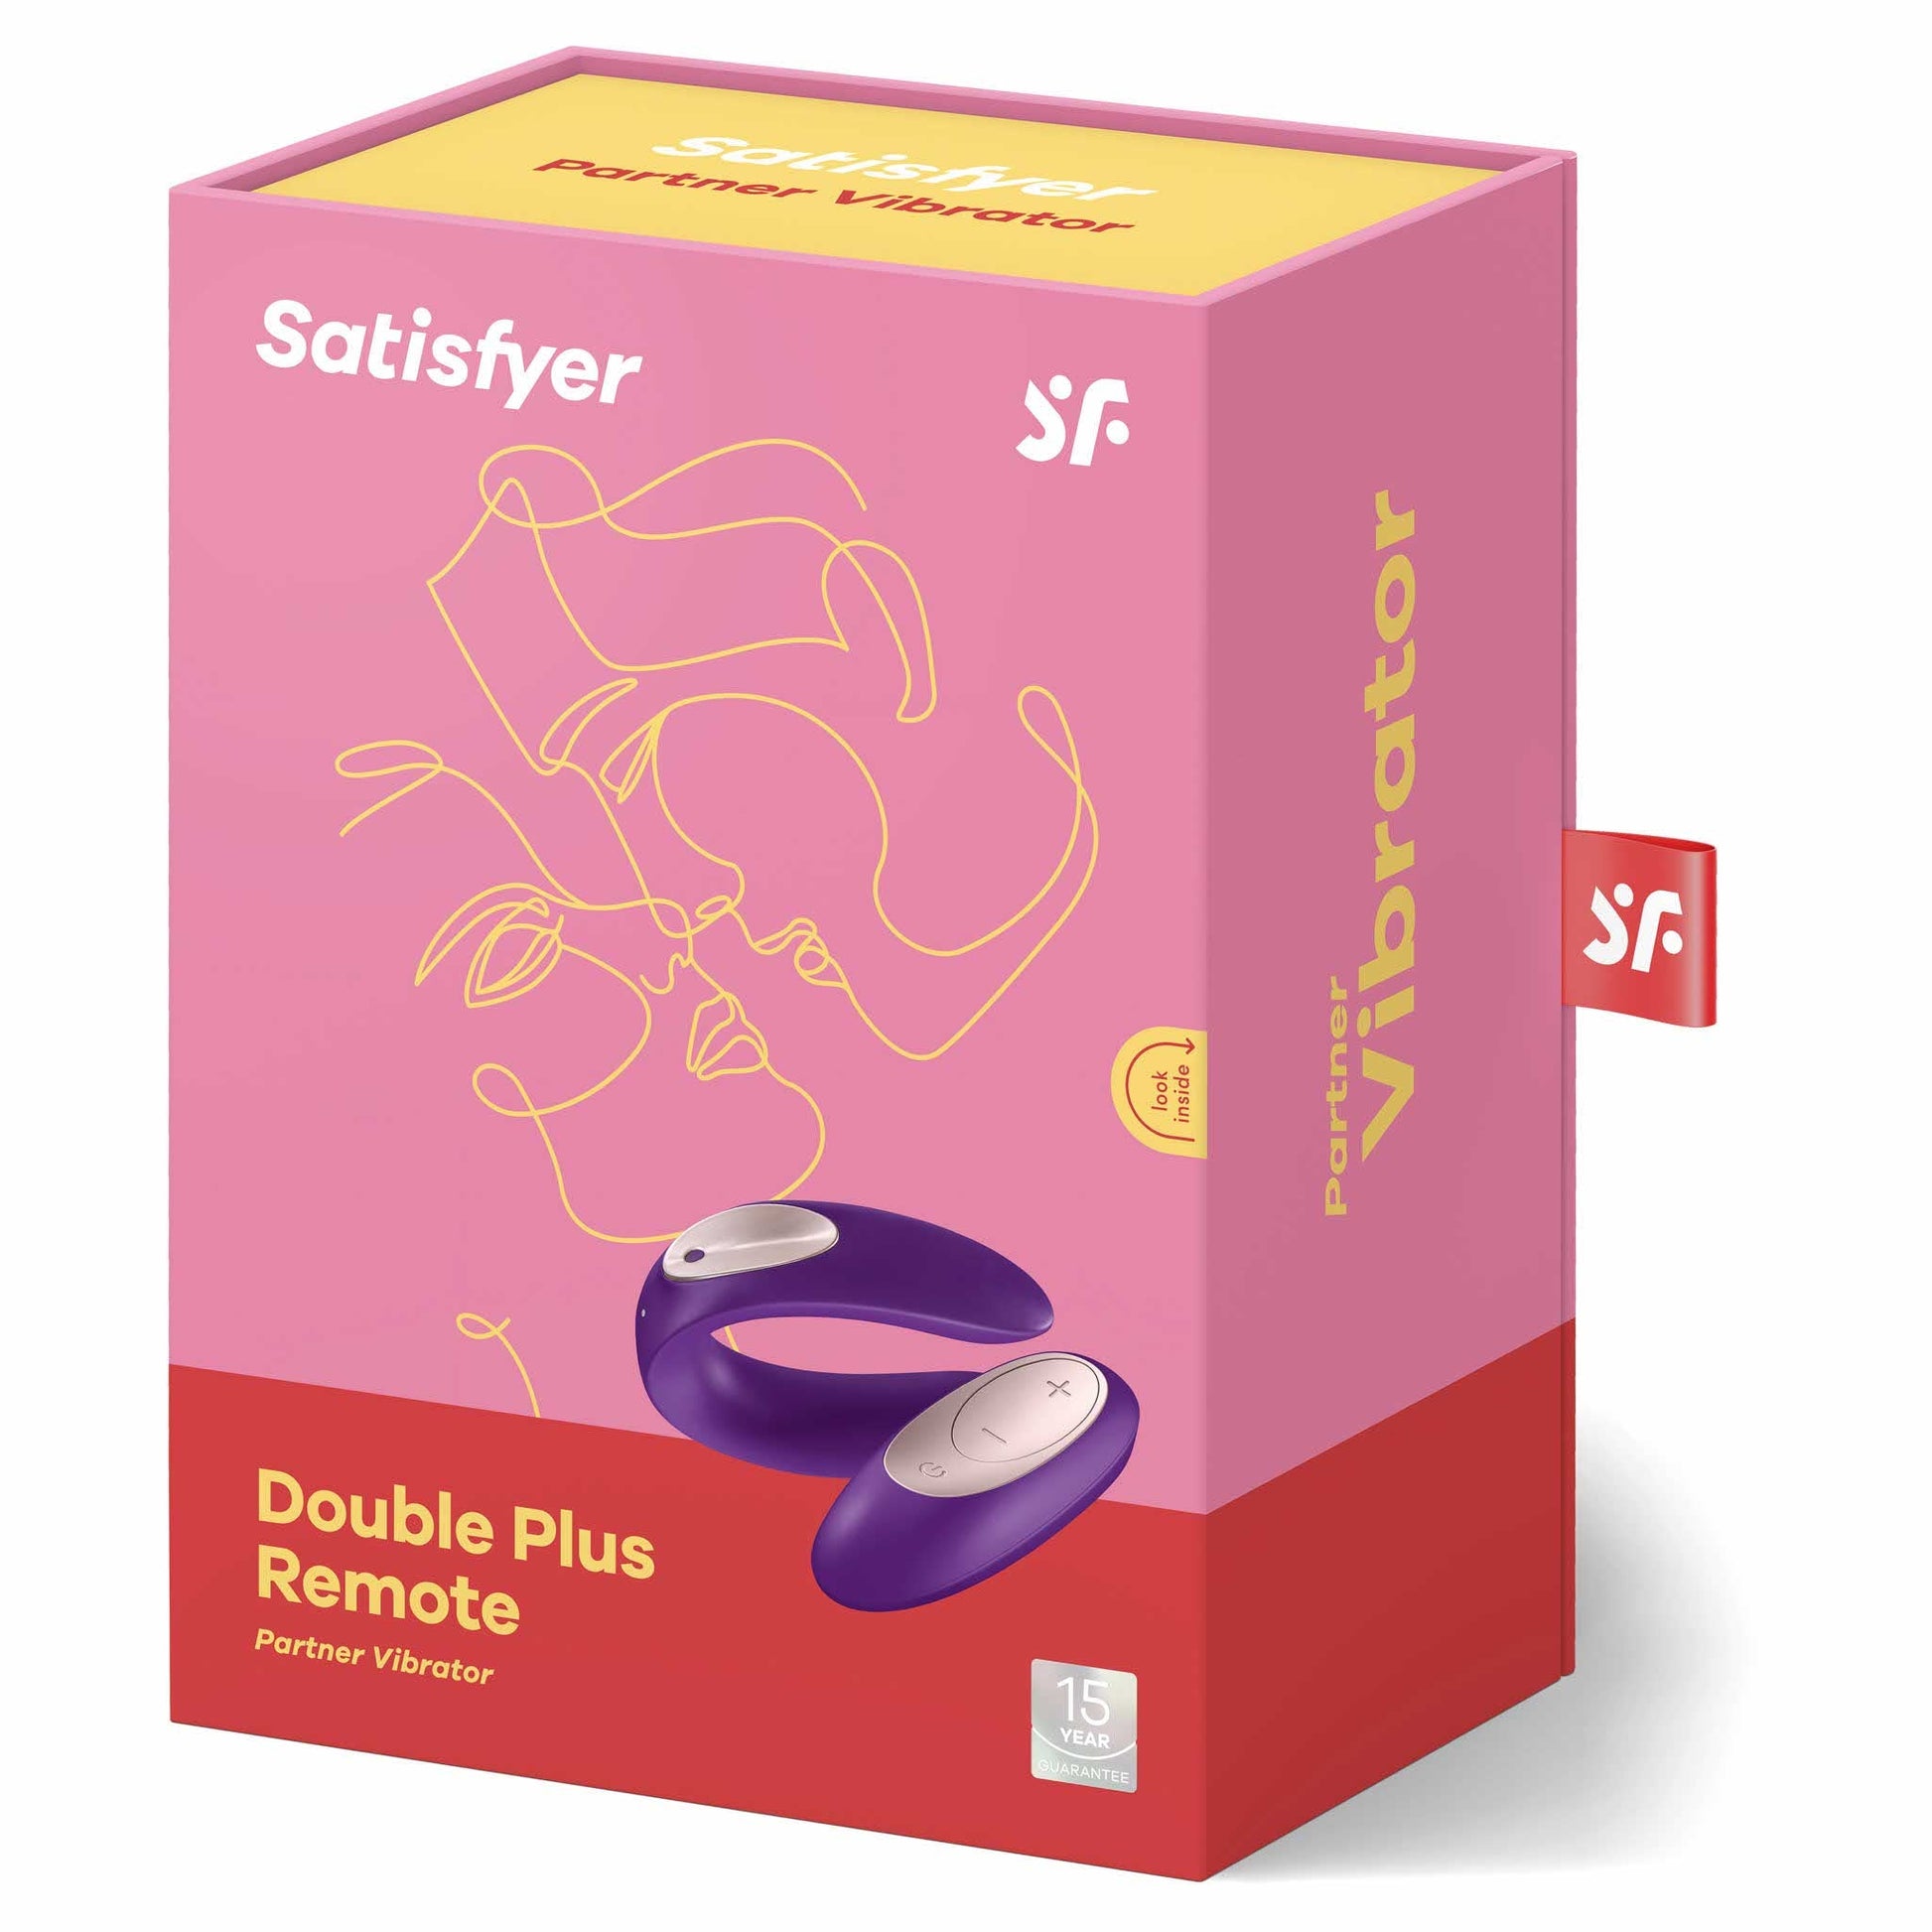 packaging of the satisfyer double plus remote control couples vibrator eisp04 purple